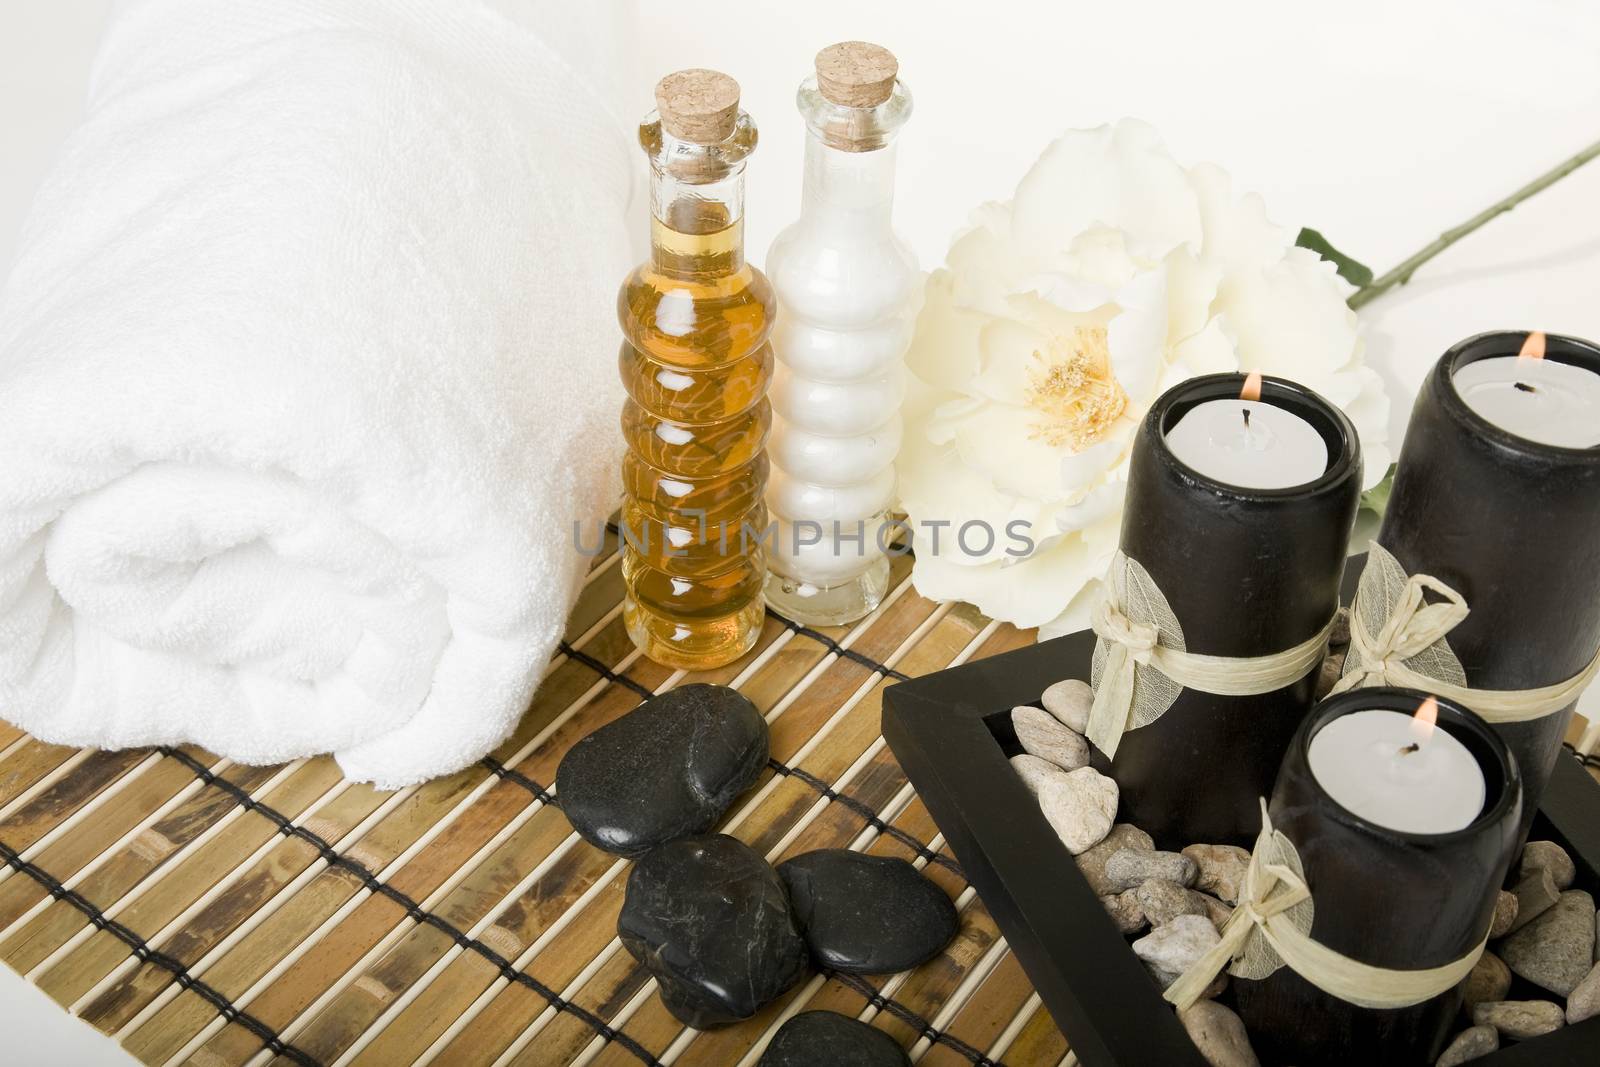 Bath & spa products with massage stones, oil essences & aromatic candles.